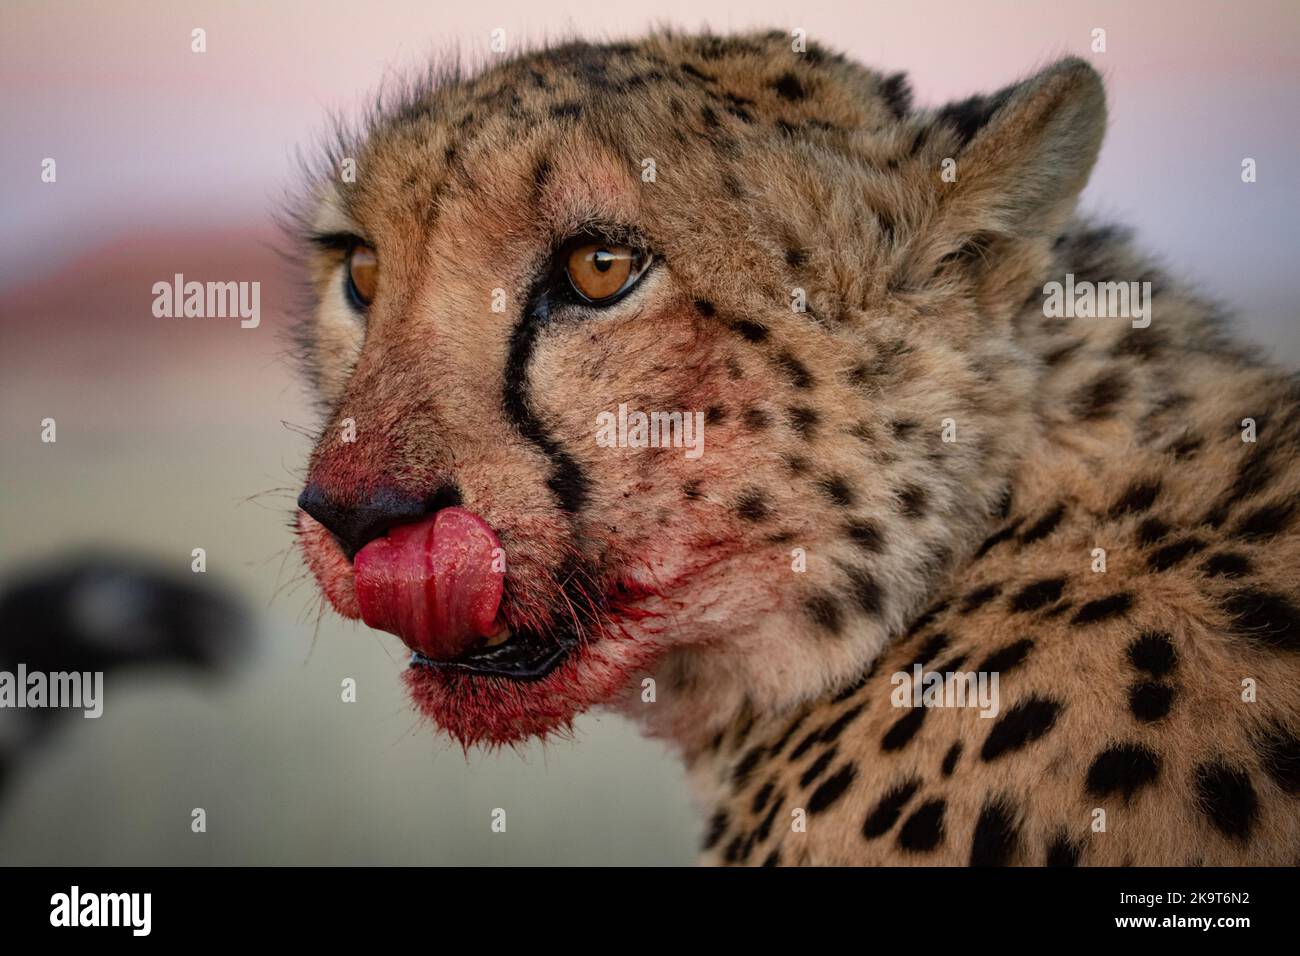 A hungry cheetah devouring his meal, photographed on a safari in South Africa Stock Photo